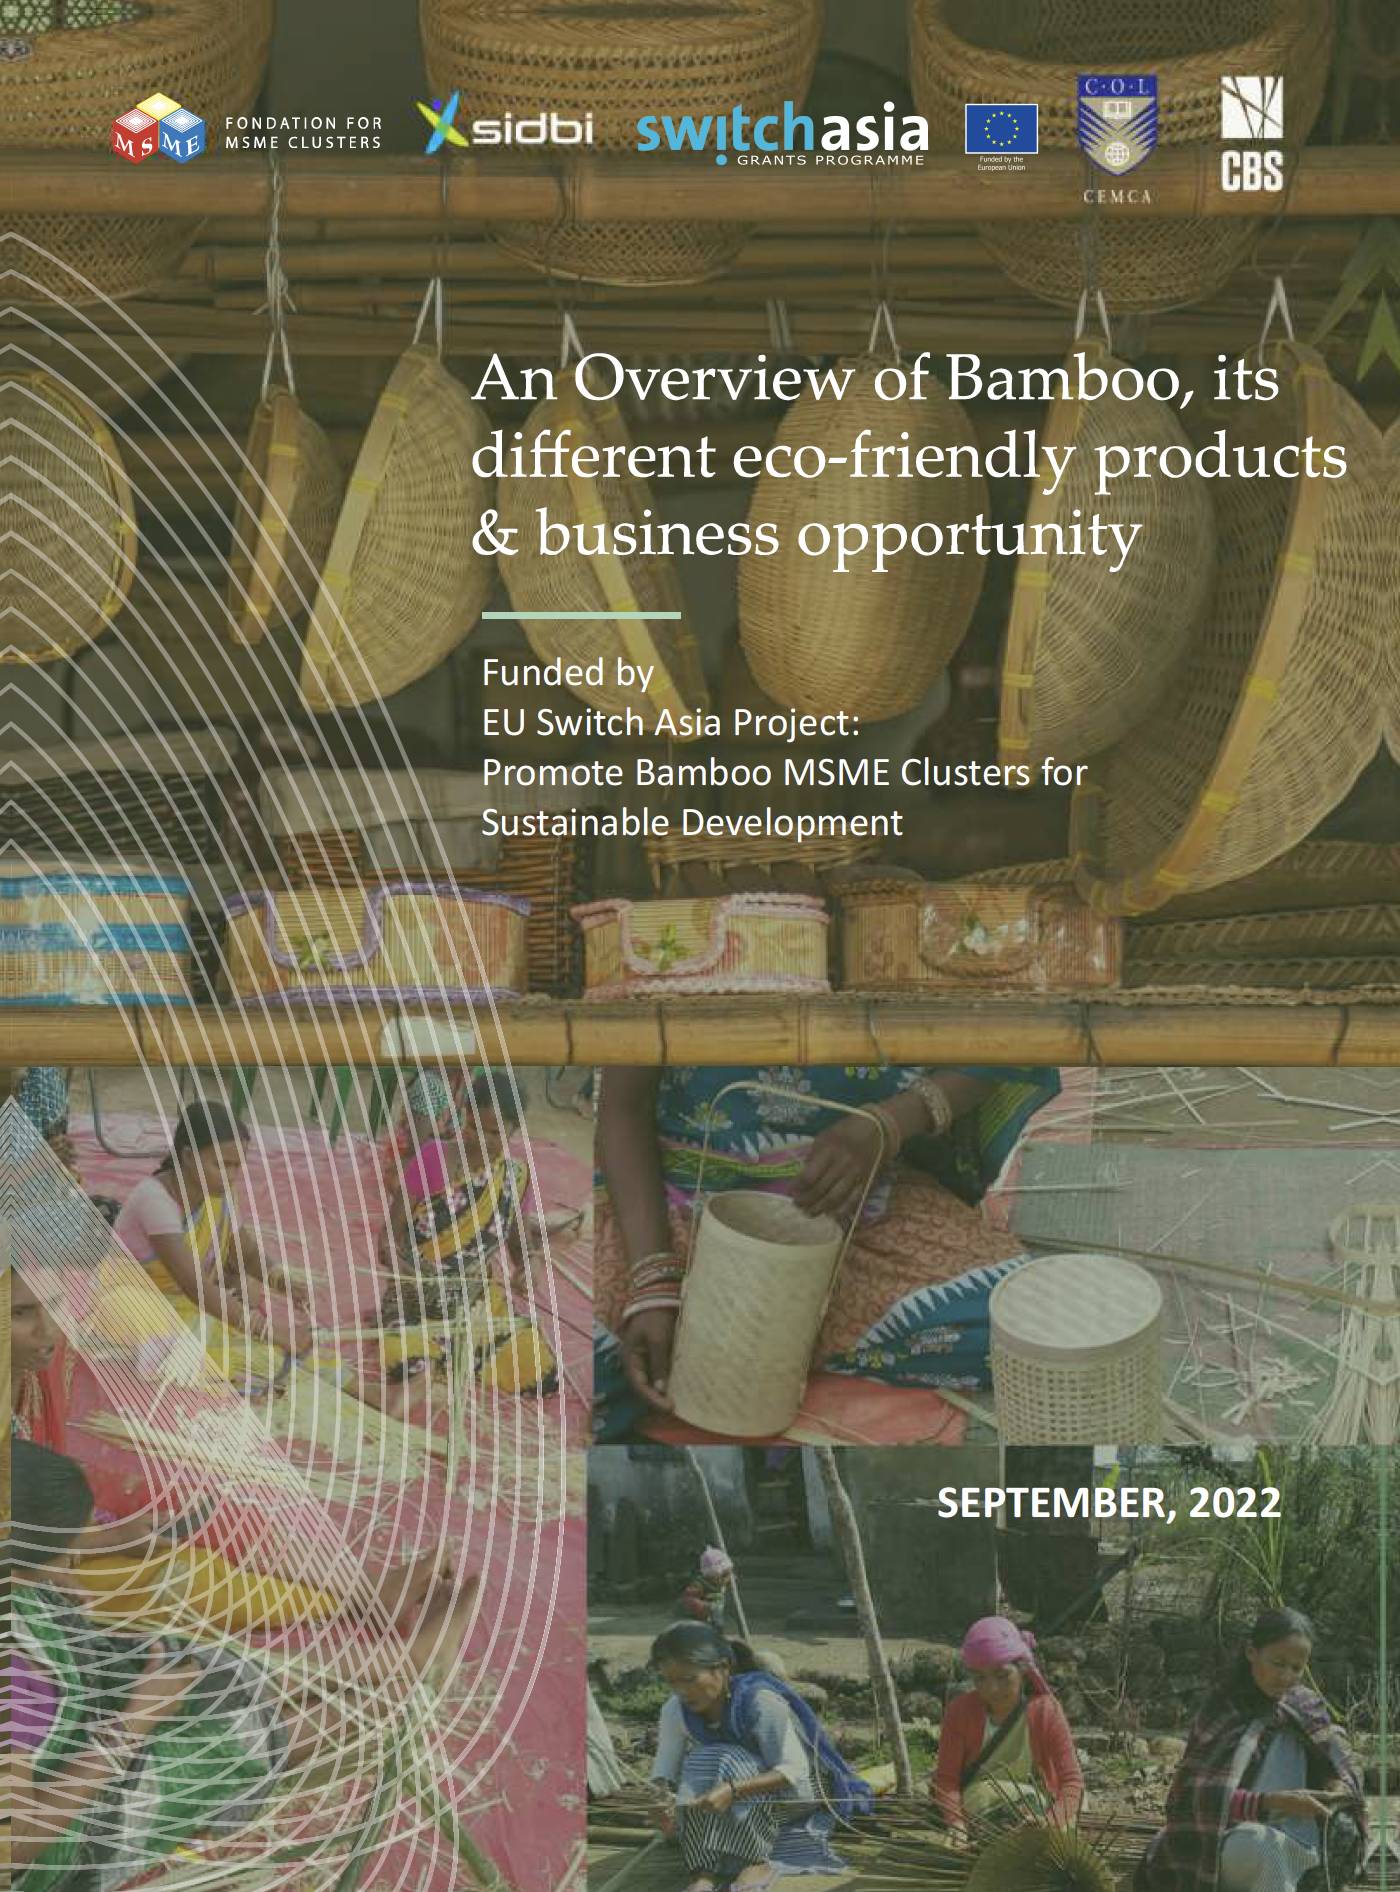 An Overview of Bamboo, its Different Eco-friendly Products & Business Opportunities